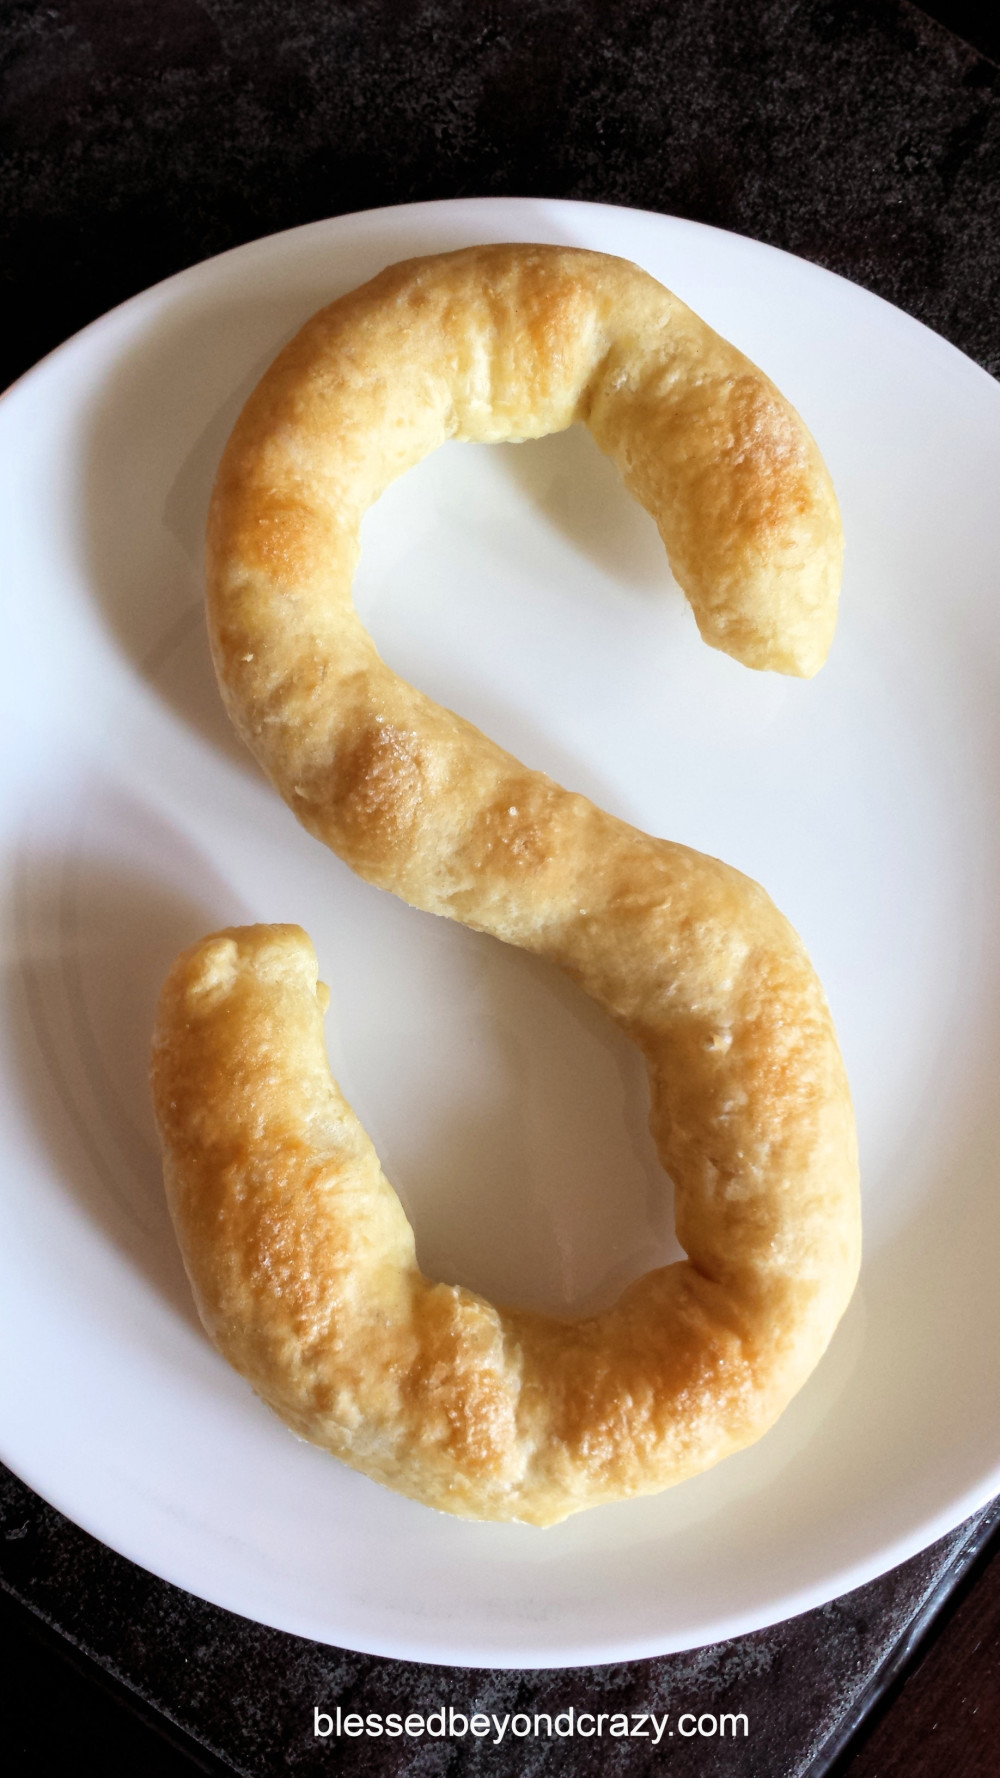 How to make Dutch Letter Pastries